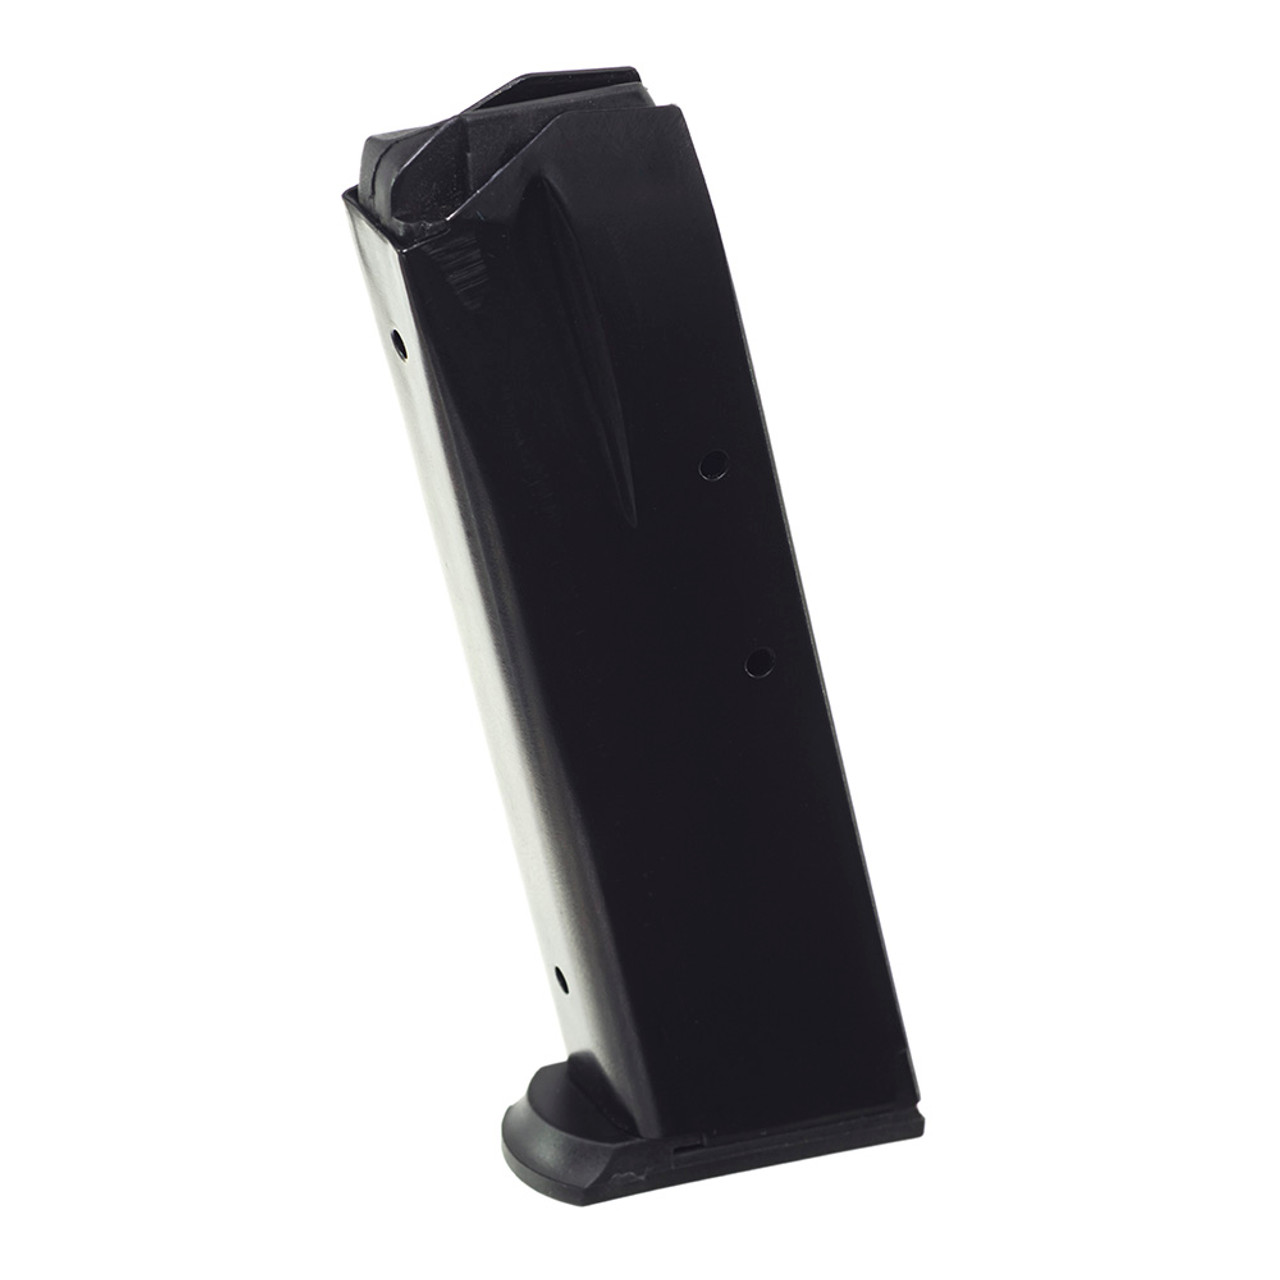 SCCY 01-006 CPX 9mm 10 Round Magazine Black for sale online